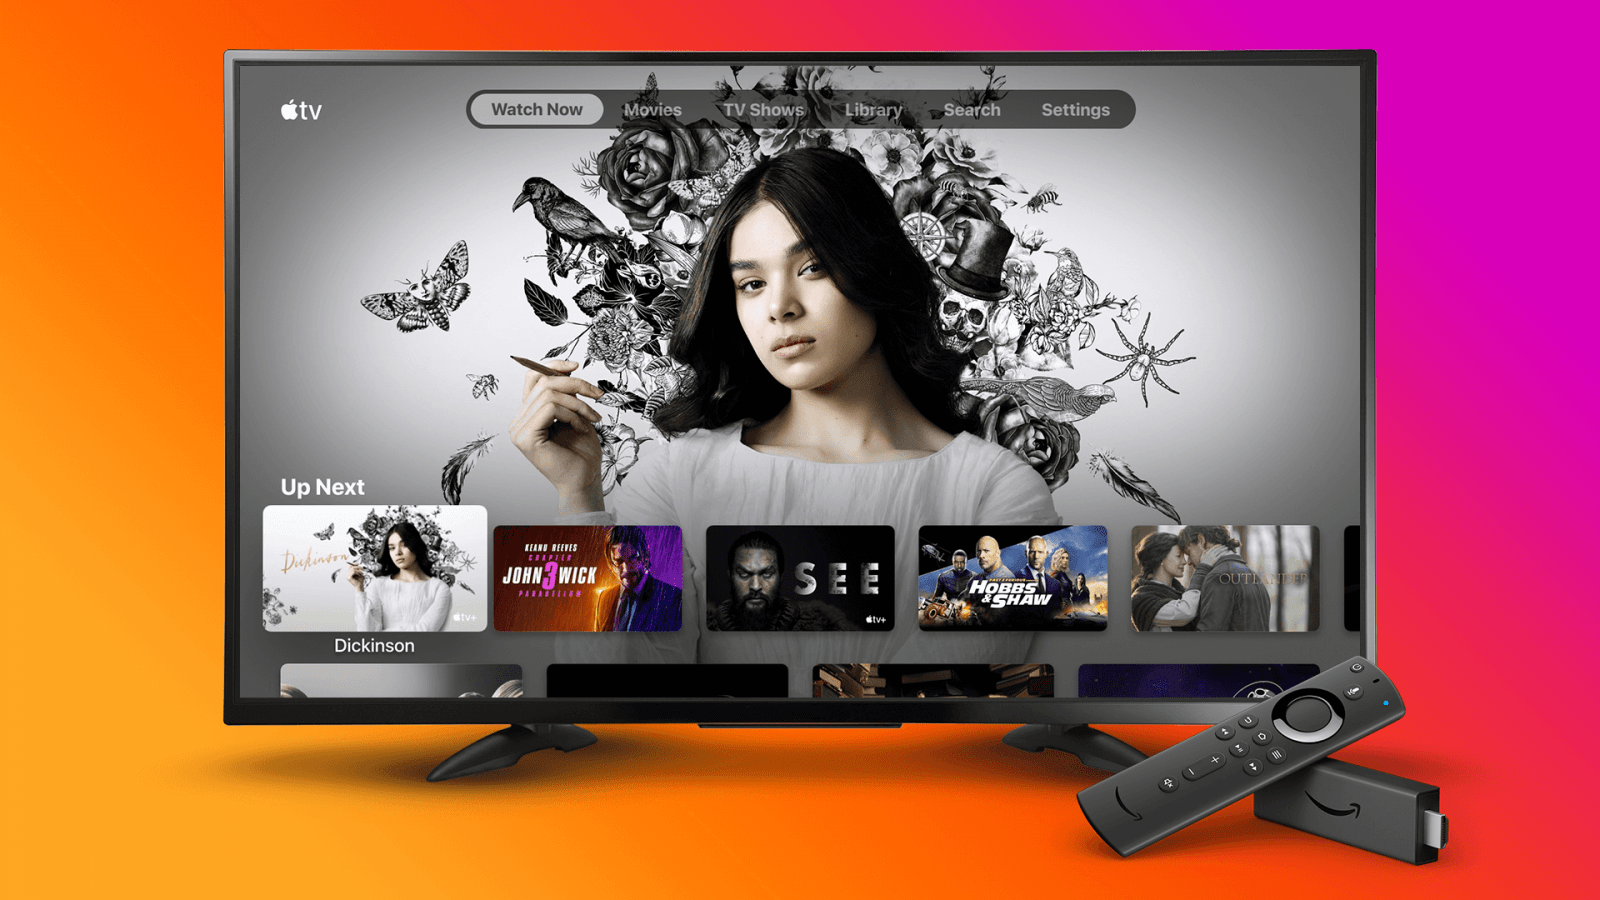 How to Install Apple TV App on Firestick [2020]